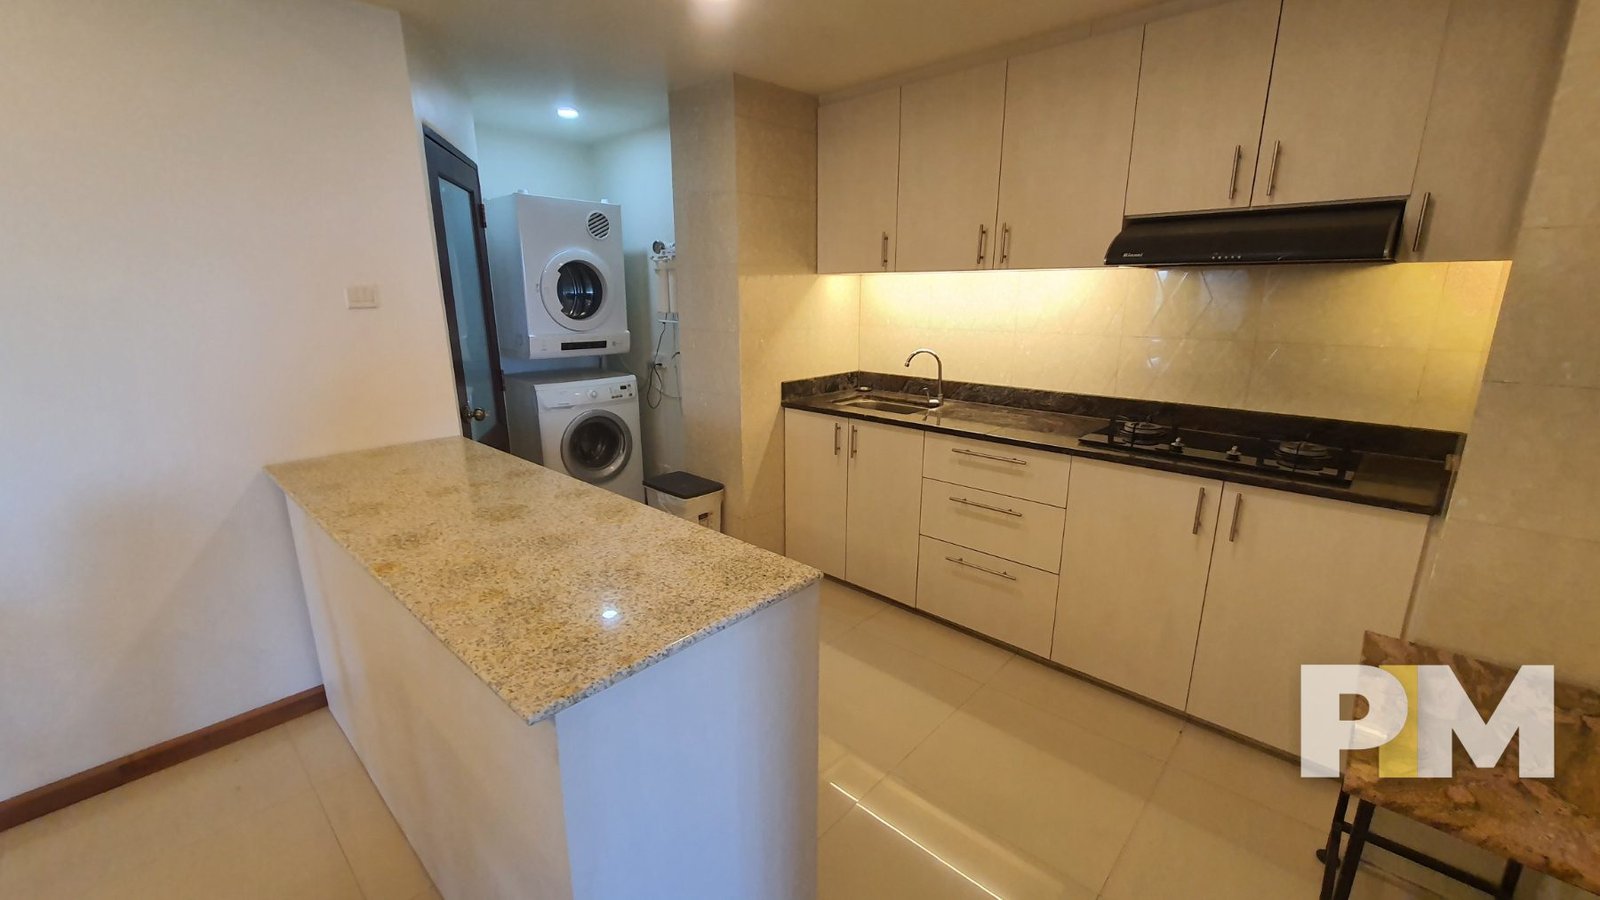 kitchen - property for rent in yangon